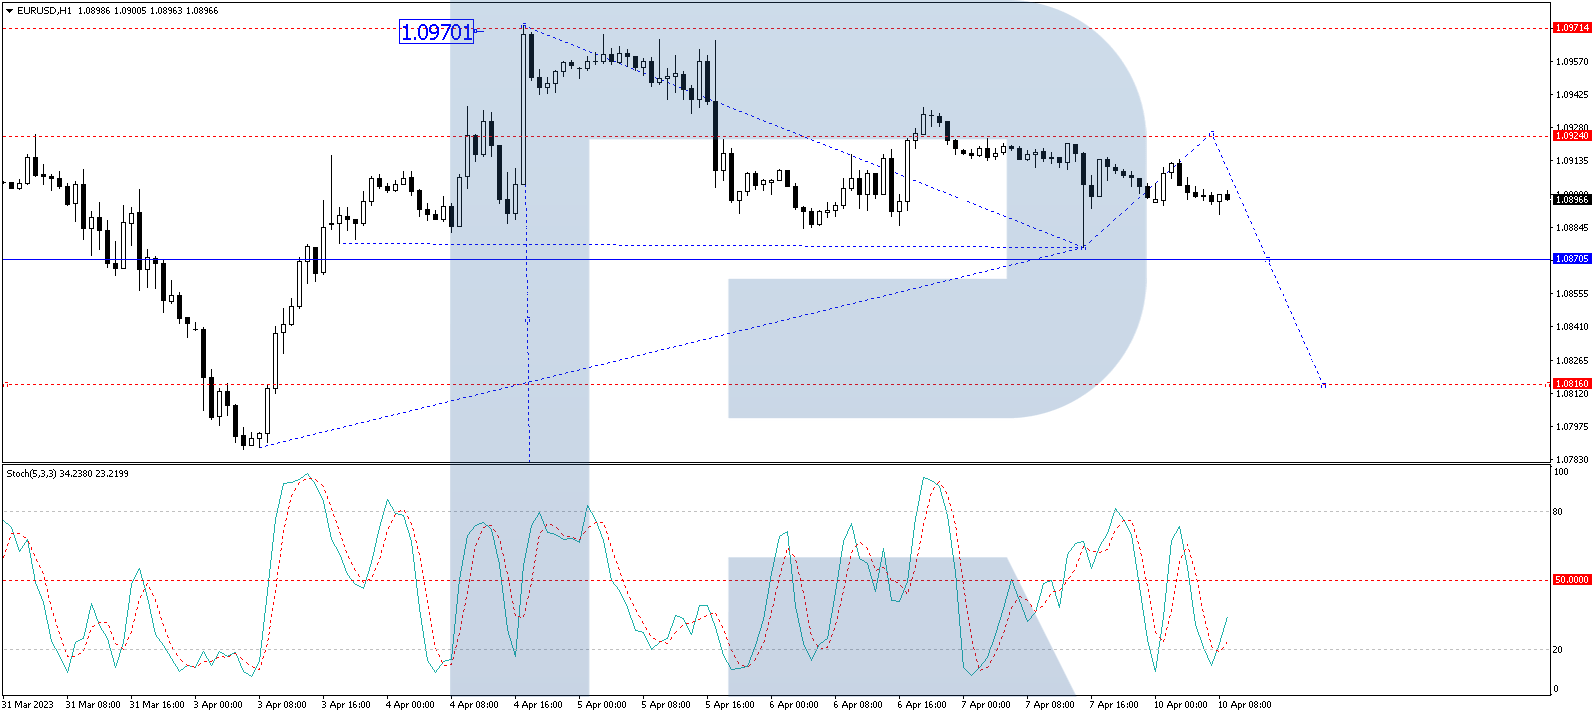 On the H1 chart, the EUR/USD currency pair has completed a structure of the declining wave to 1.0875